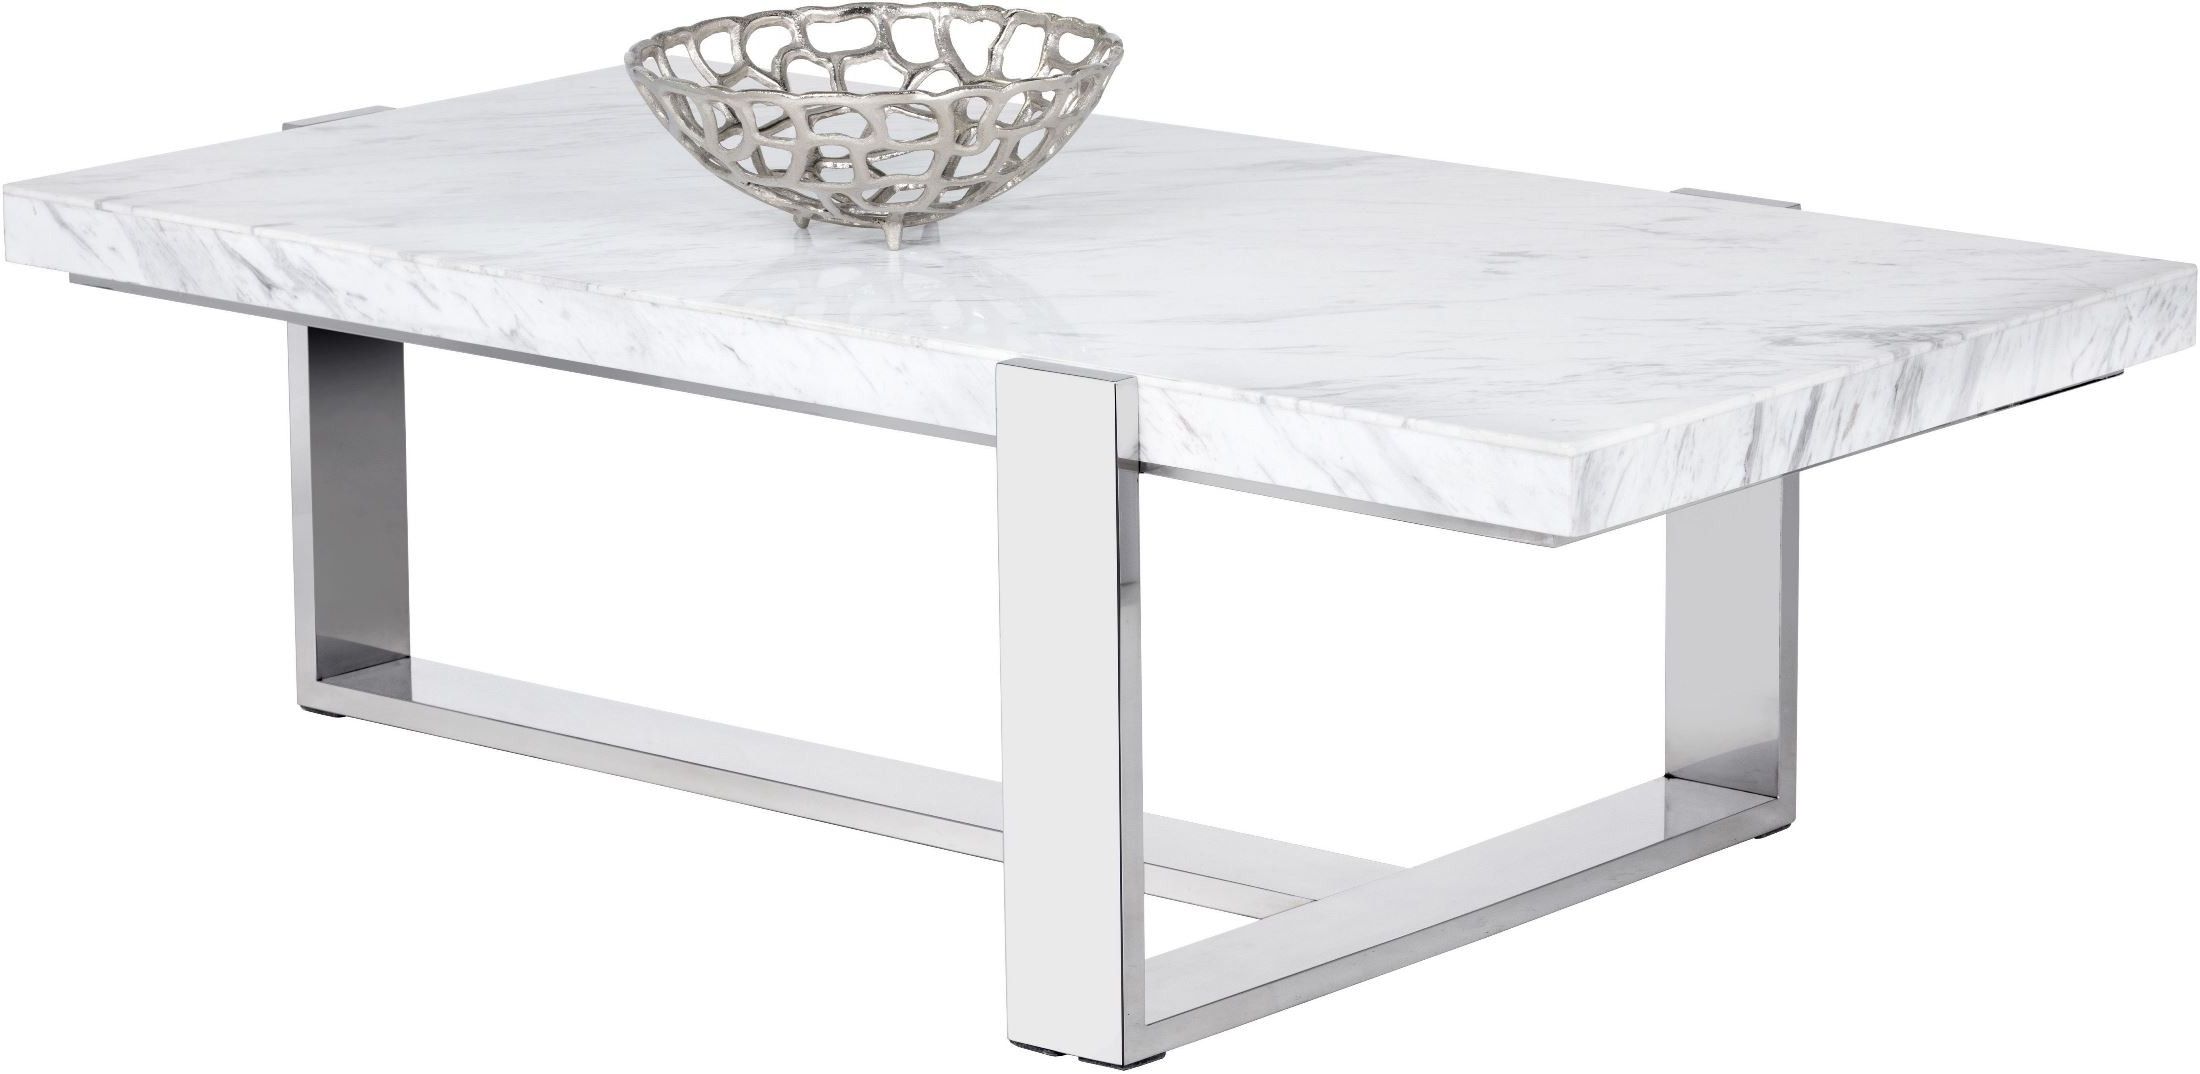 Tribecca White Marble Rectangular Coffee Table, 101294 Within Well Known Faux White Marble And Metal Coffee Tables (View 13 of 20)